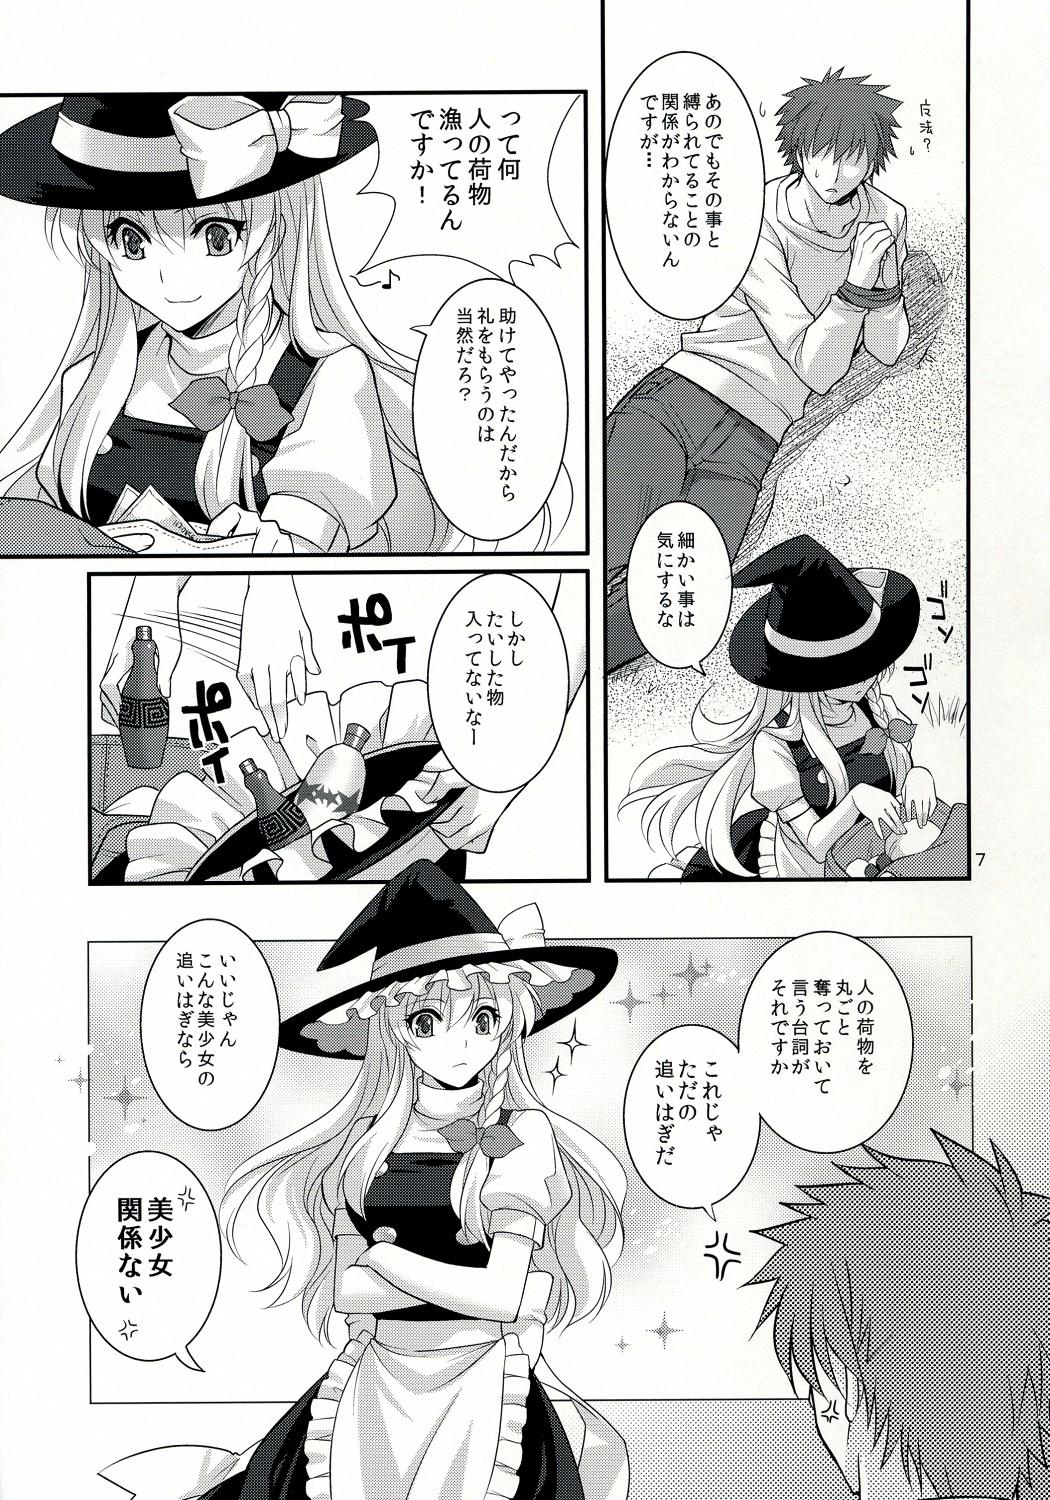  Ze!! - Touhou project Hidden - Page 7